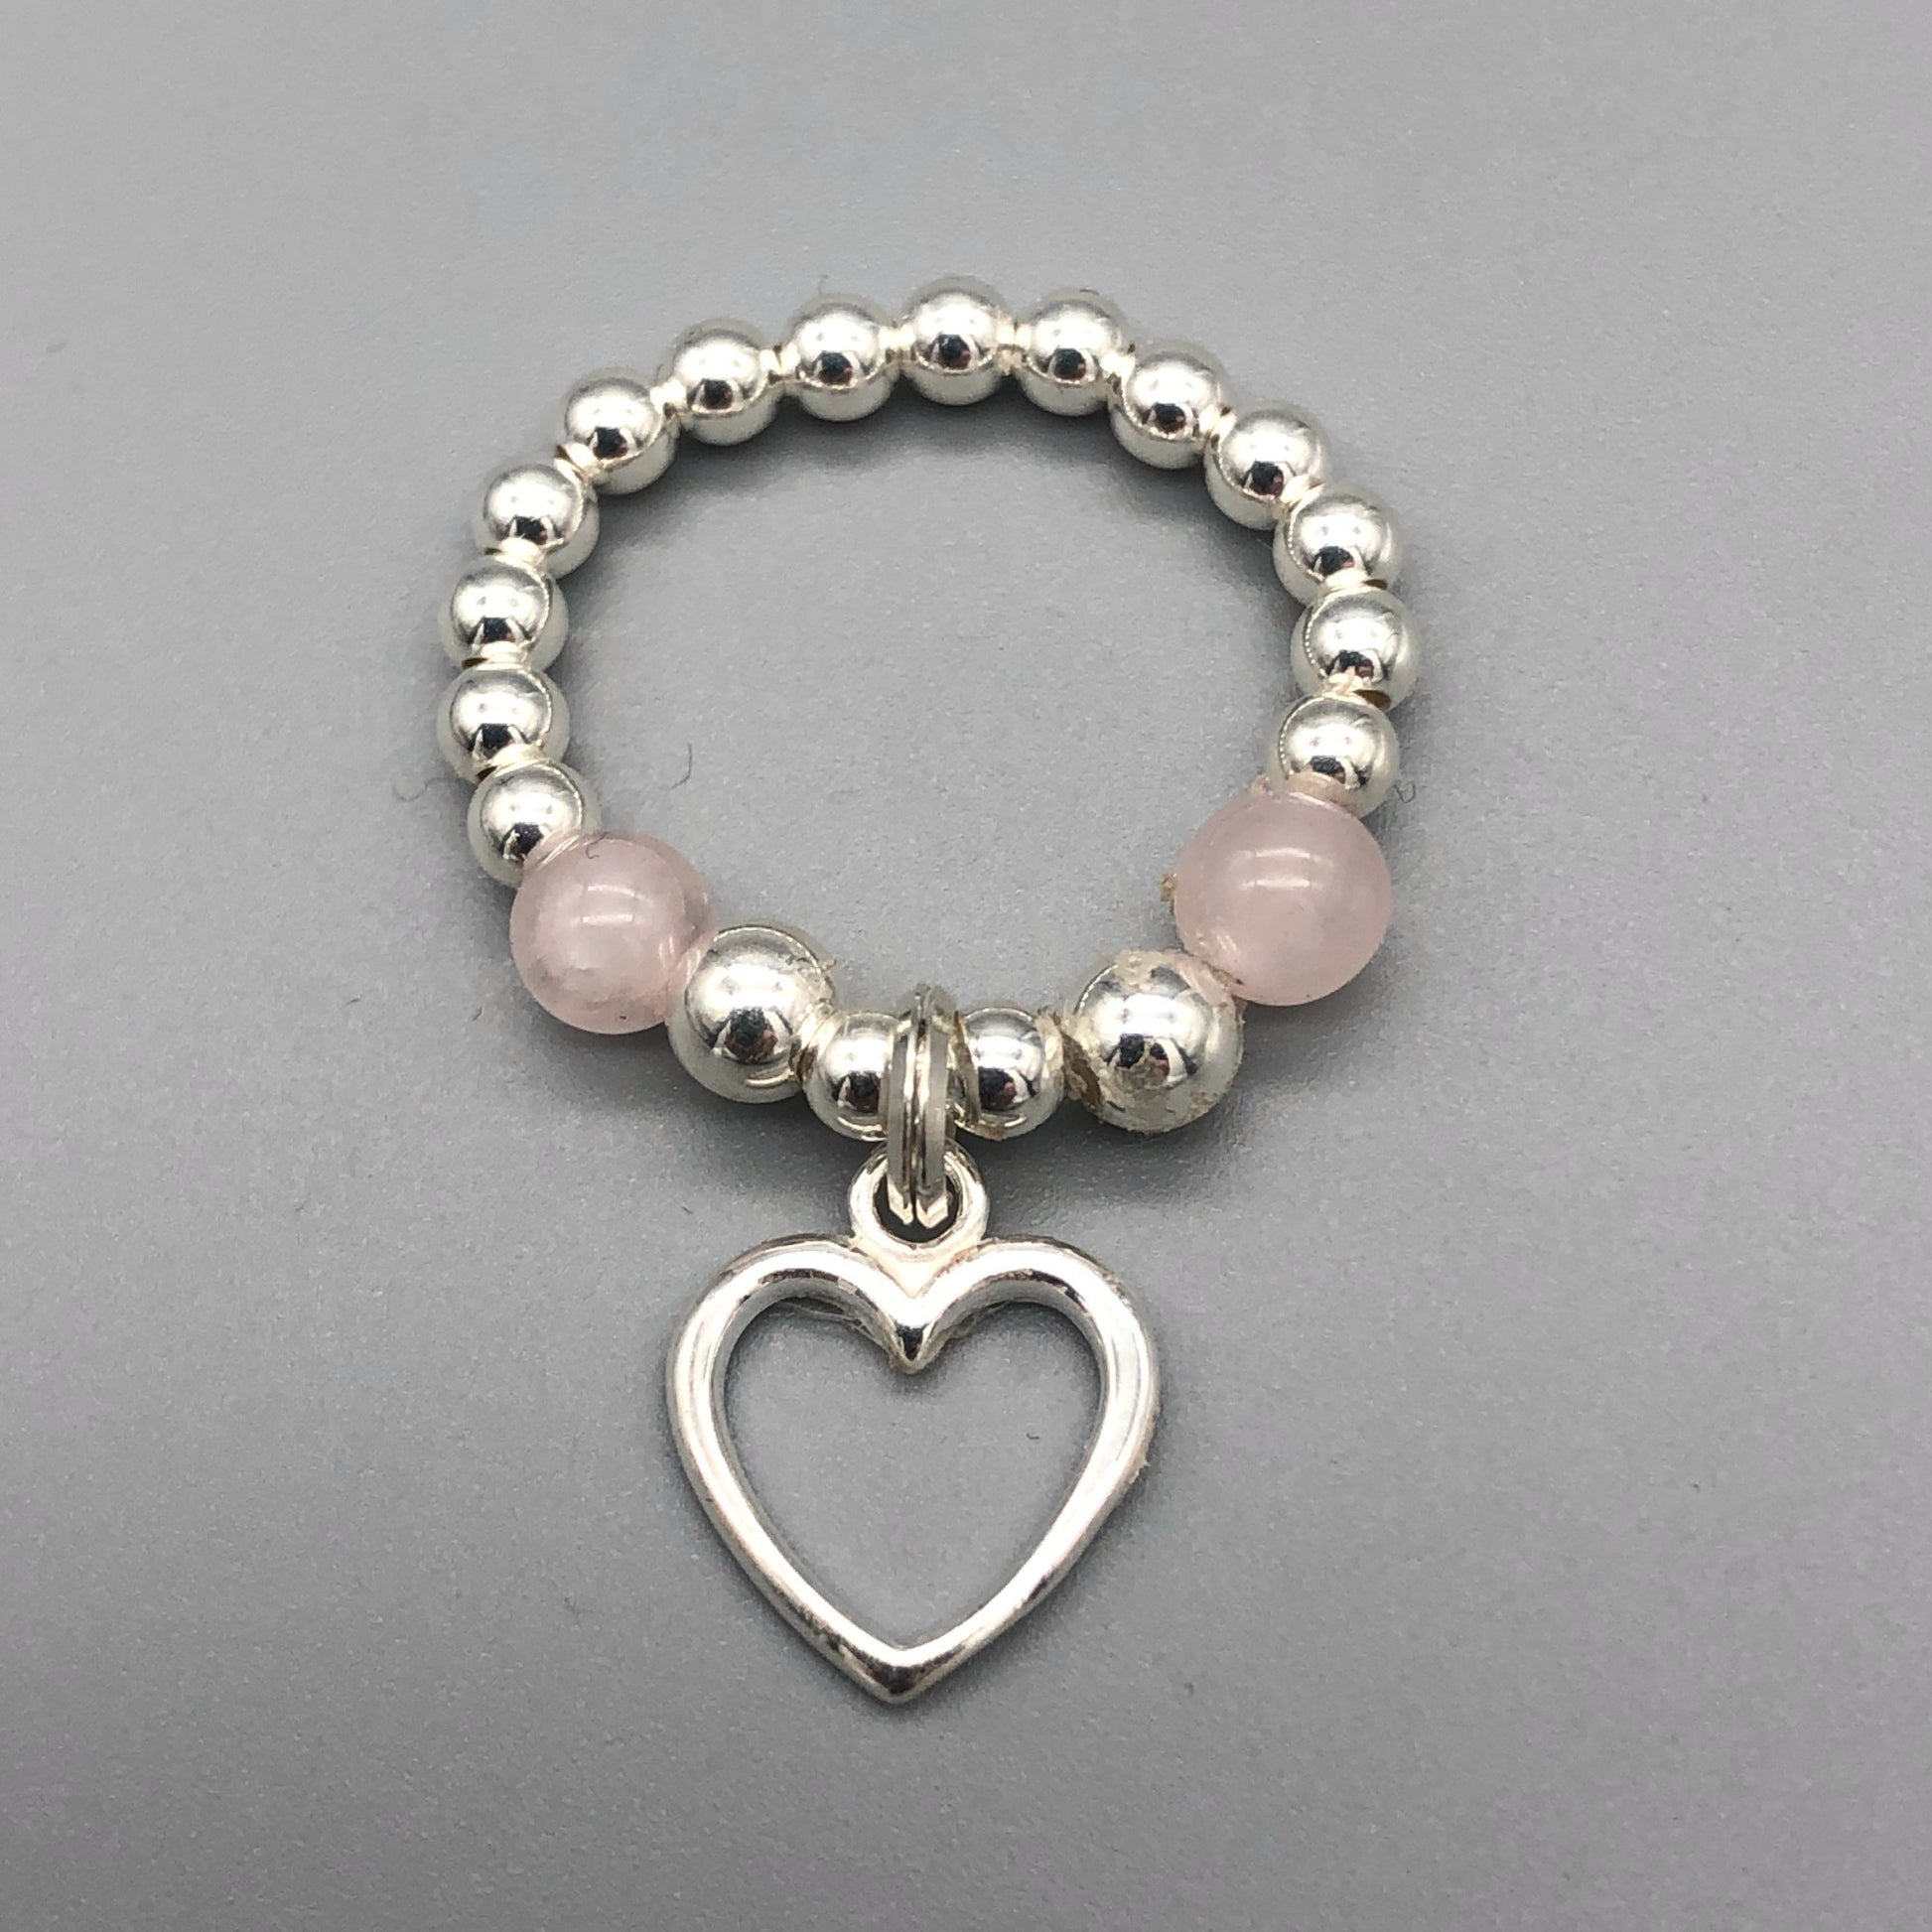 Open heart charm rose quartz & sterling silver women's stacking bead ring by My Silver Wish